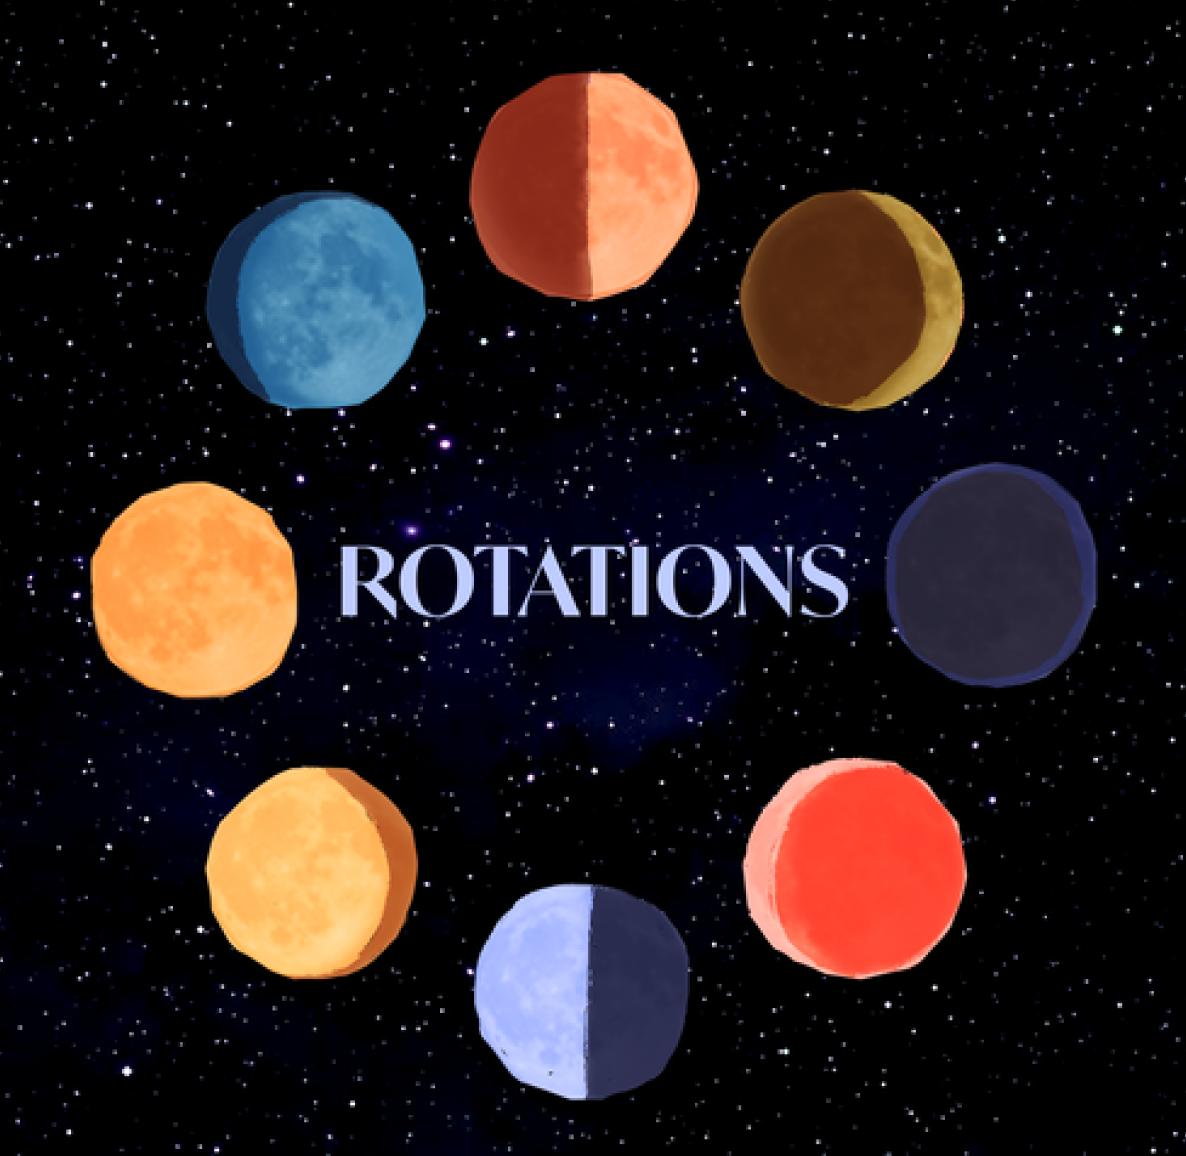 A circle of different coloured moons in yellow, orange, and purple hues each in a different phase of the 8 moon phases. In the middle of the moon circle is the word Rotations in a pale lavender colour. The background is a dark night sky brimming with tiny glowing stars.